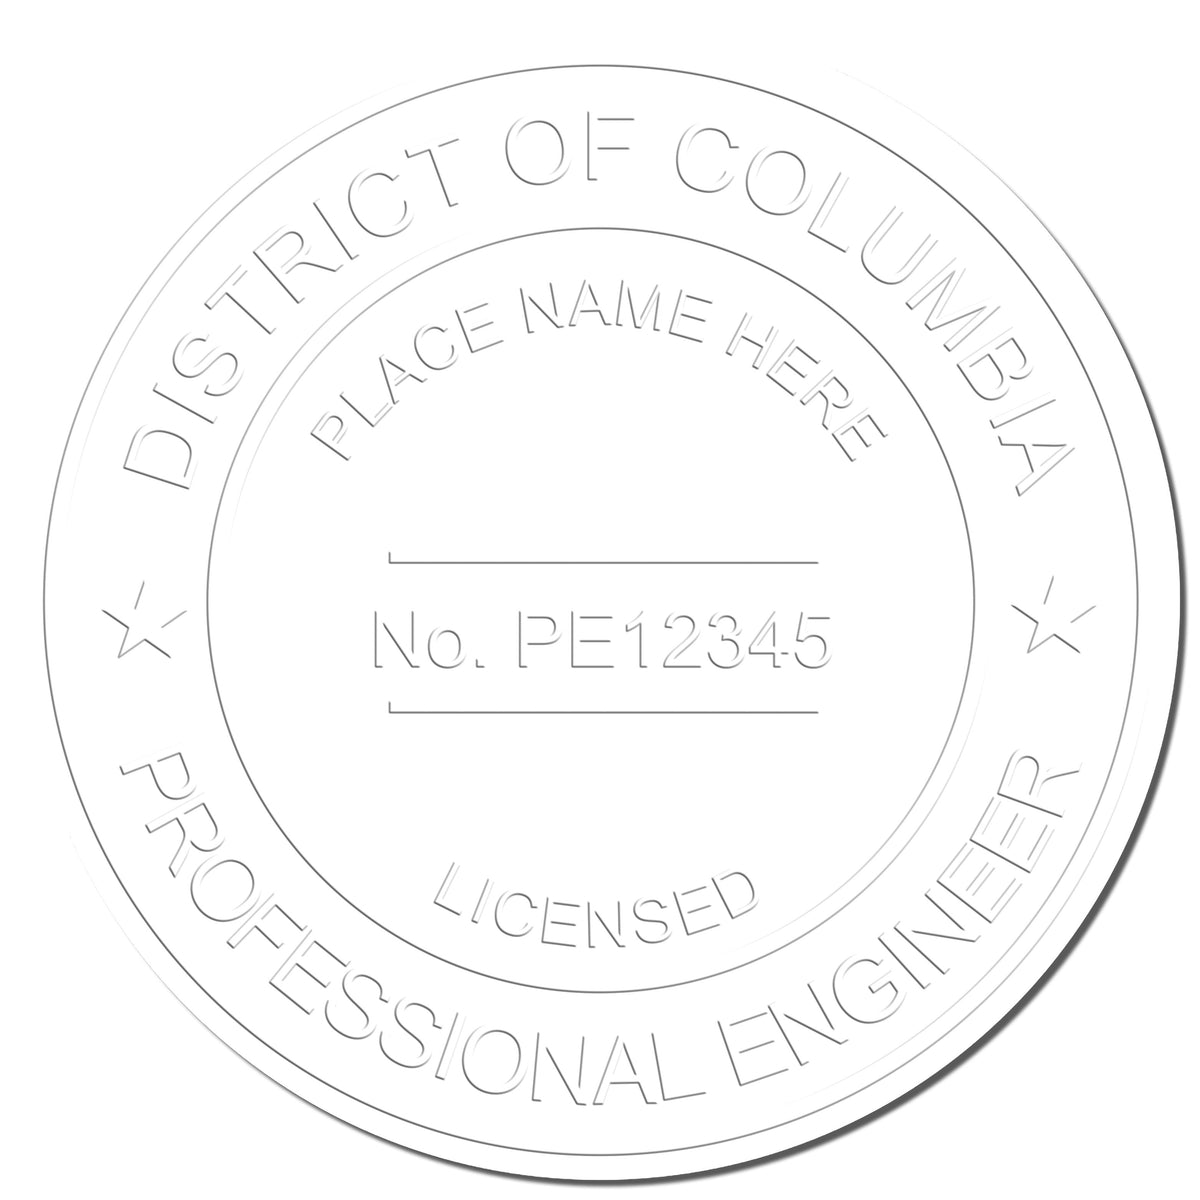 This paper is stamped with a sample imprint of the Gift District of Columbia Engineer Seal, signifying its quality and reliability.